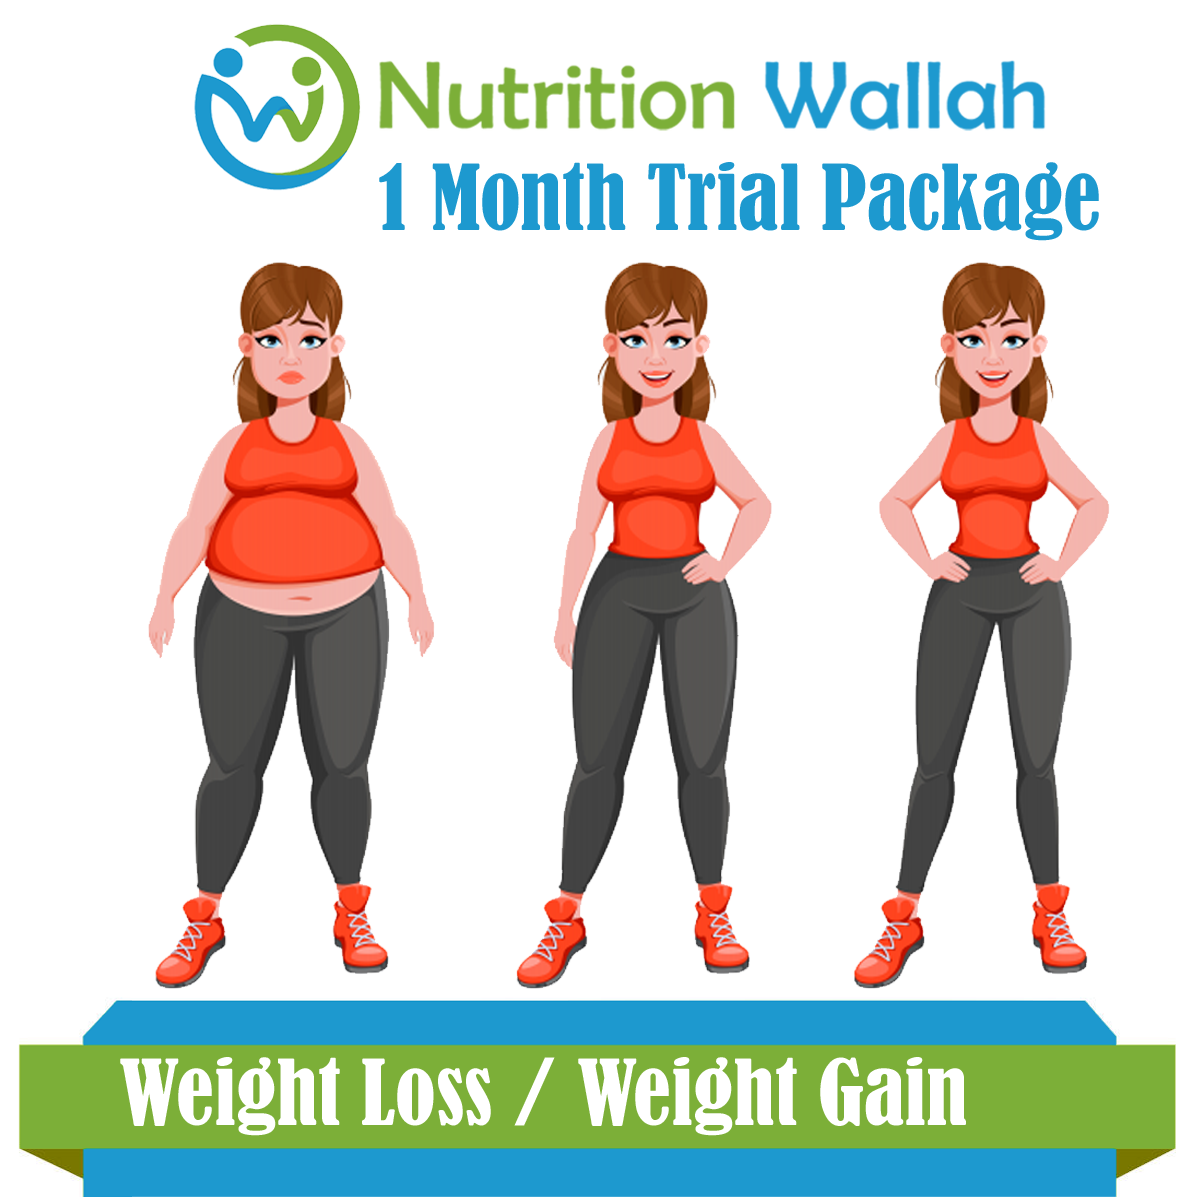 1 Month Trial Package Weight Loss or Weight Gain
